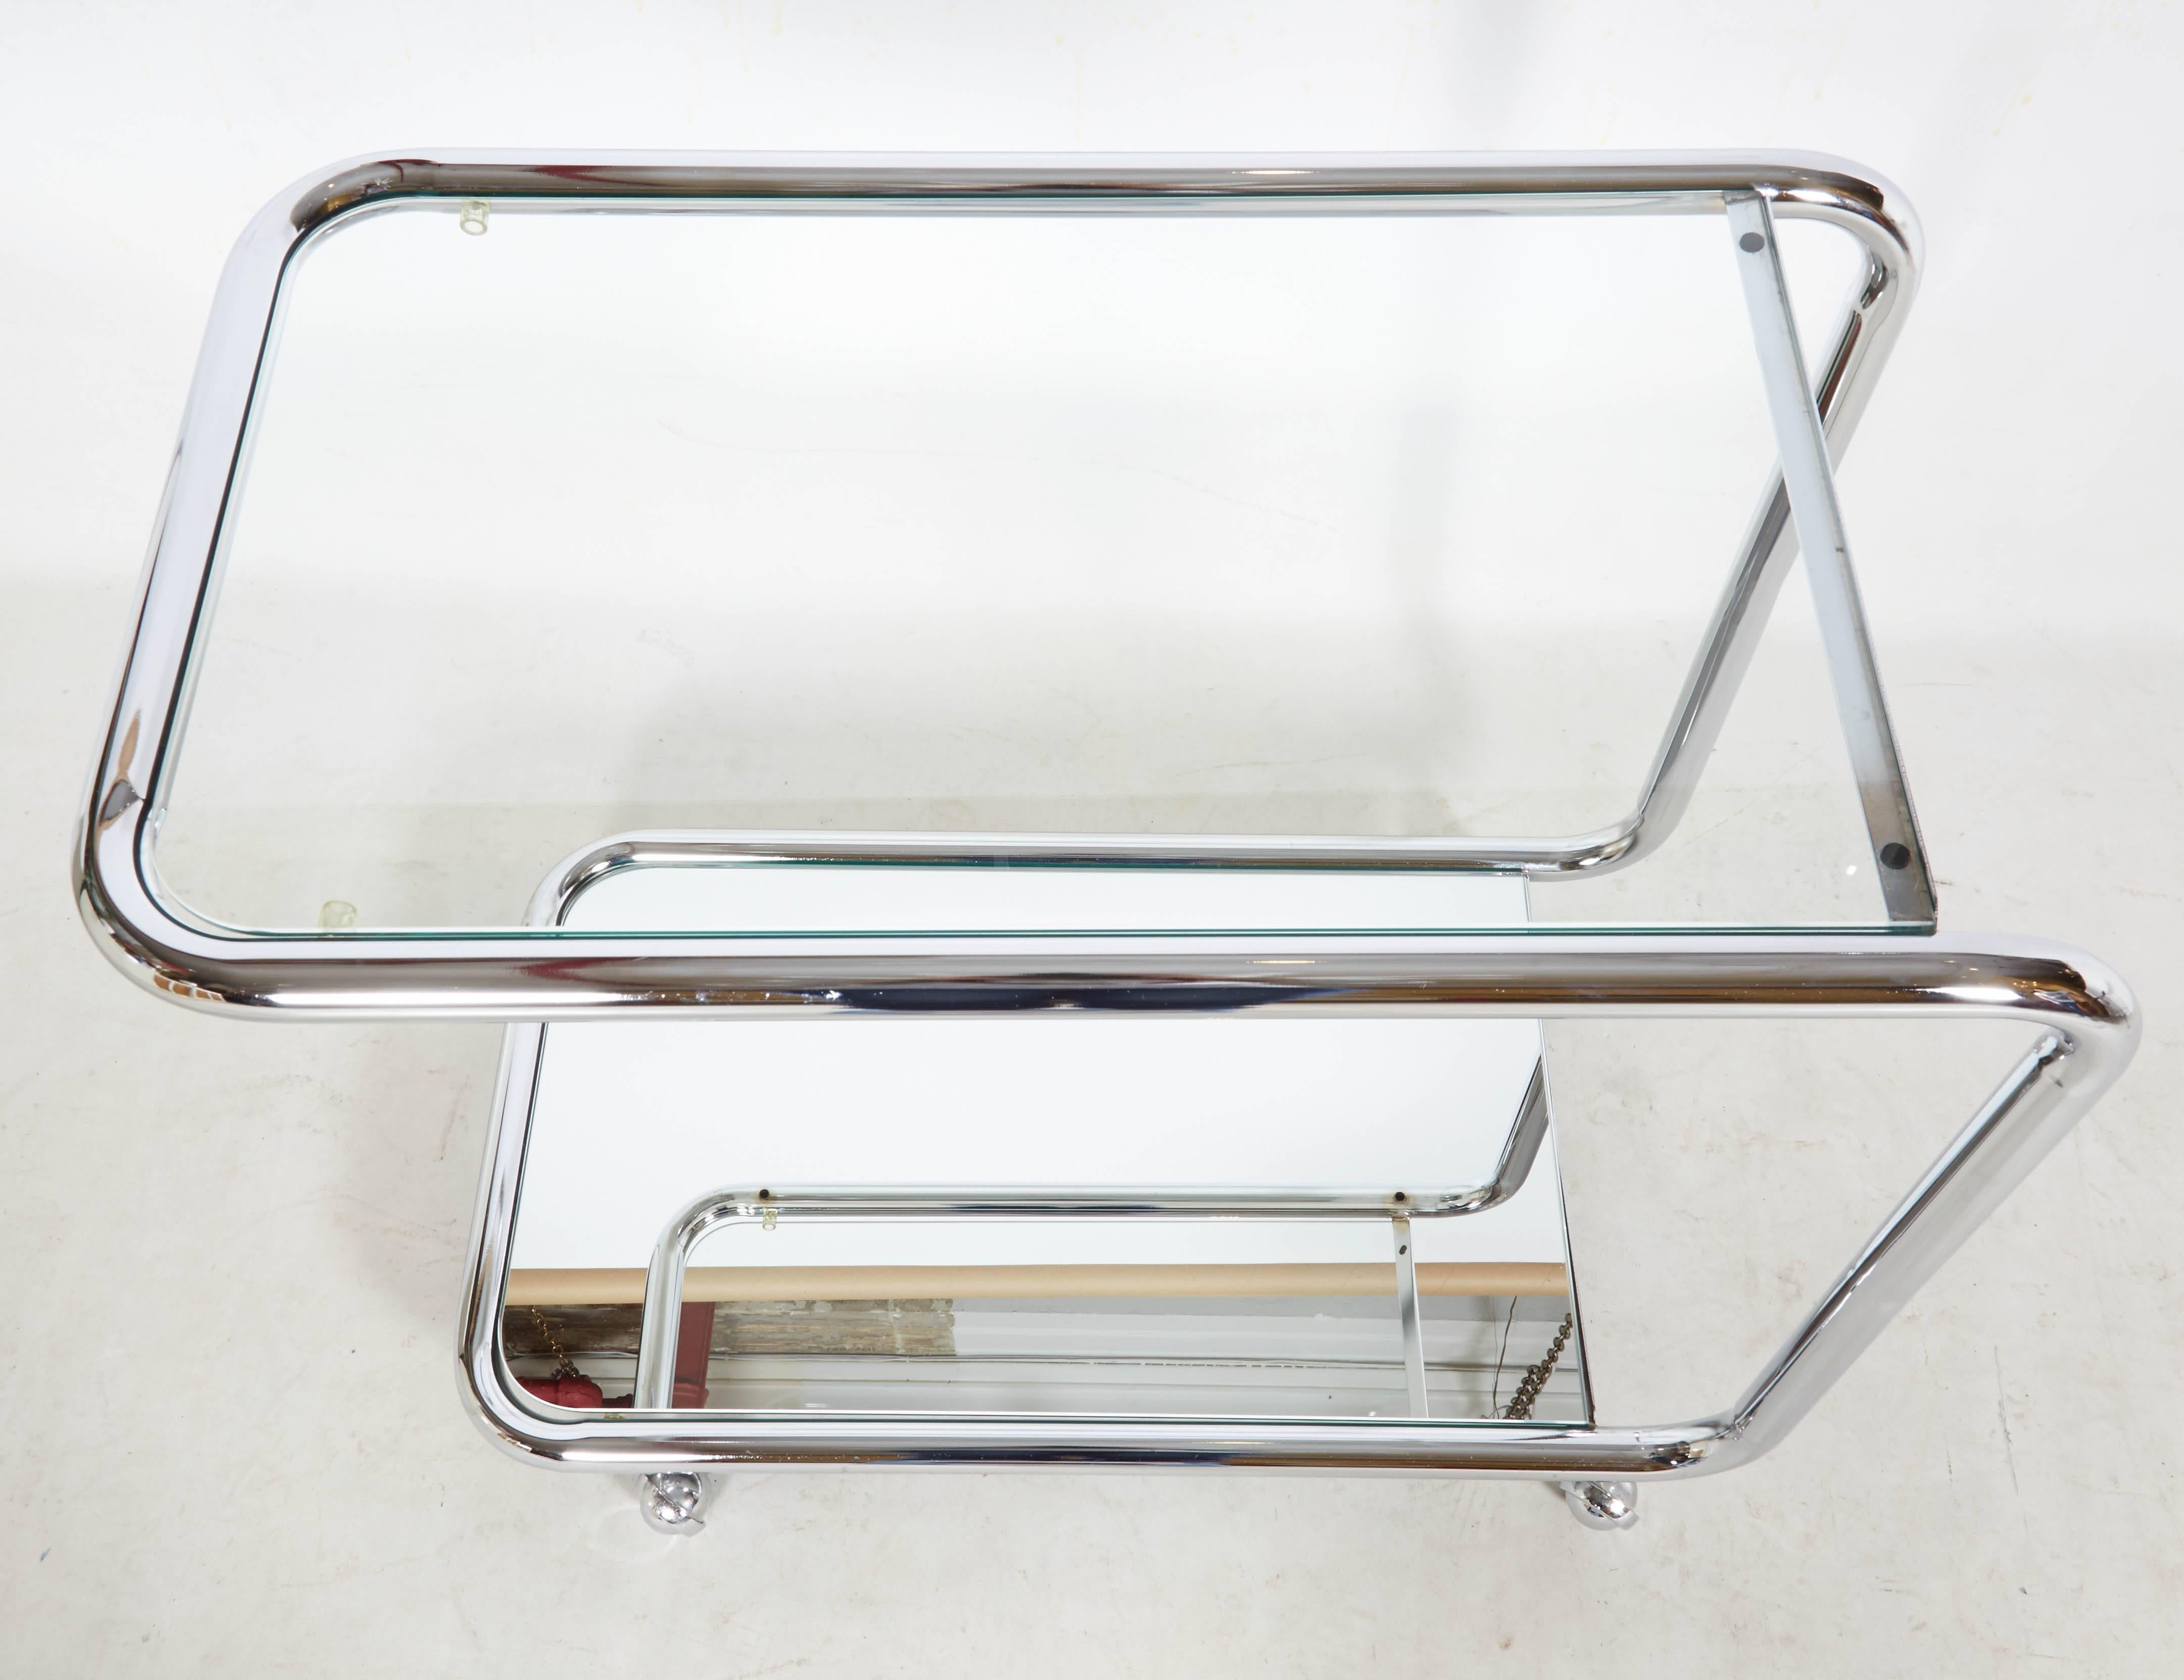 American Chrome and Glass Art Deco Revival Bar or Serving Cart